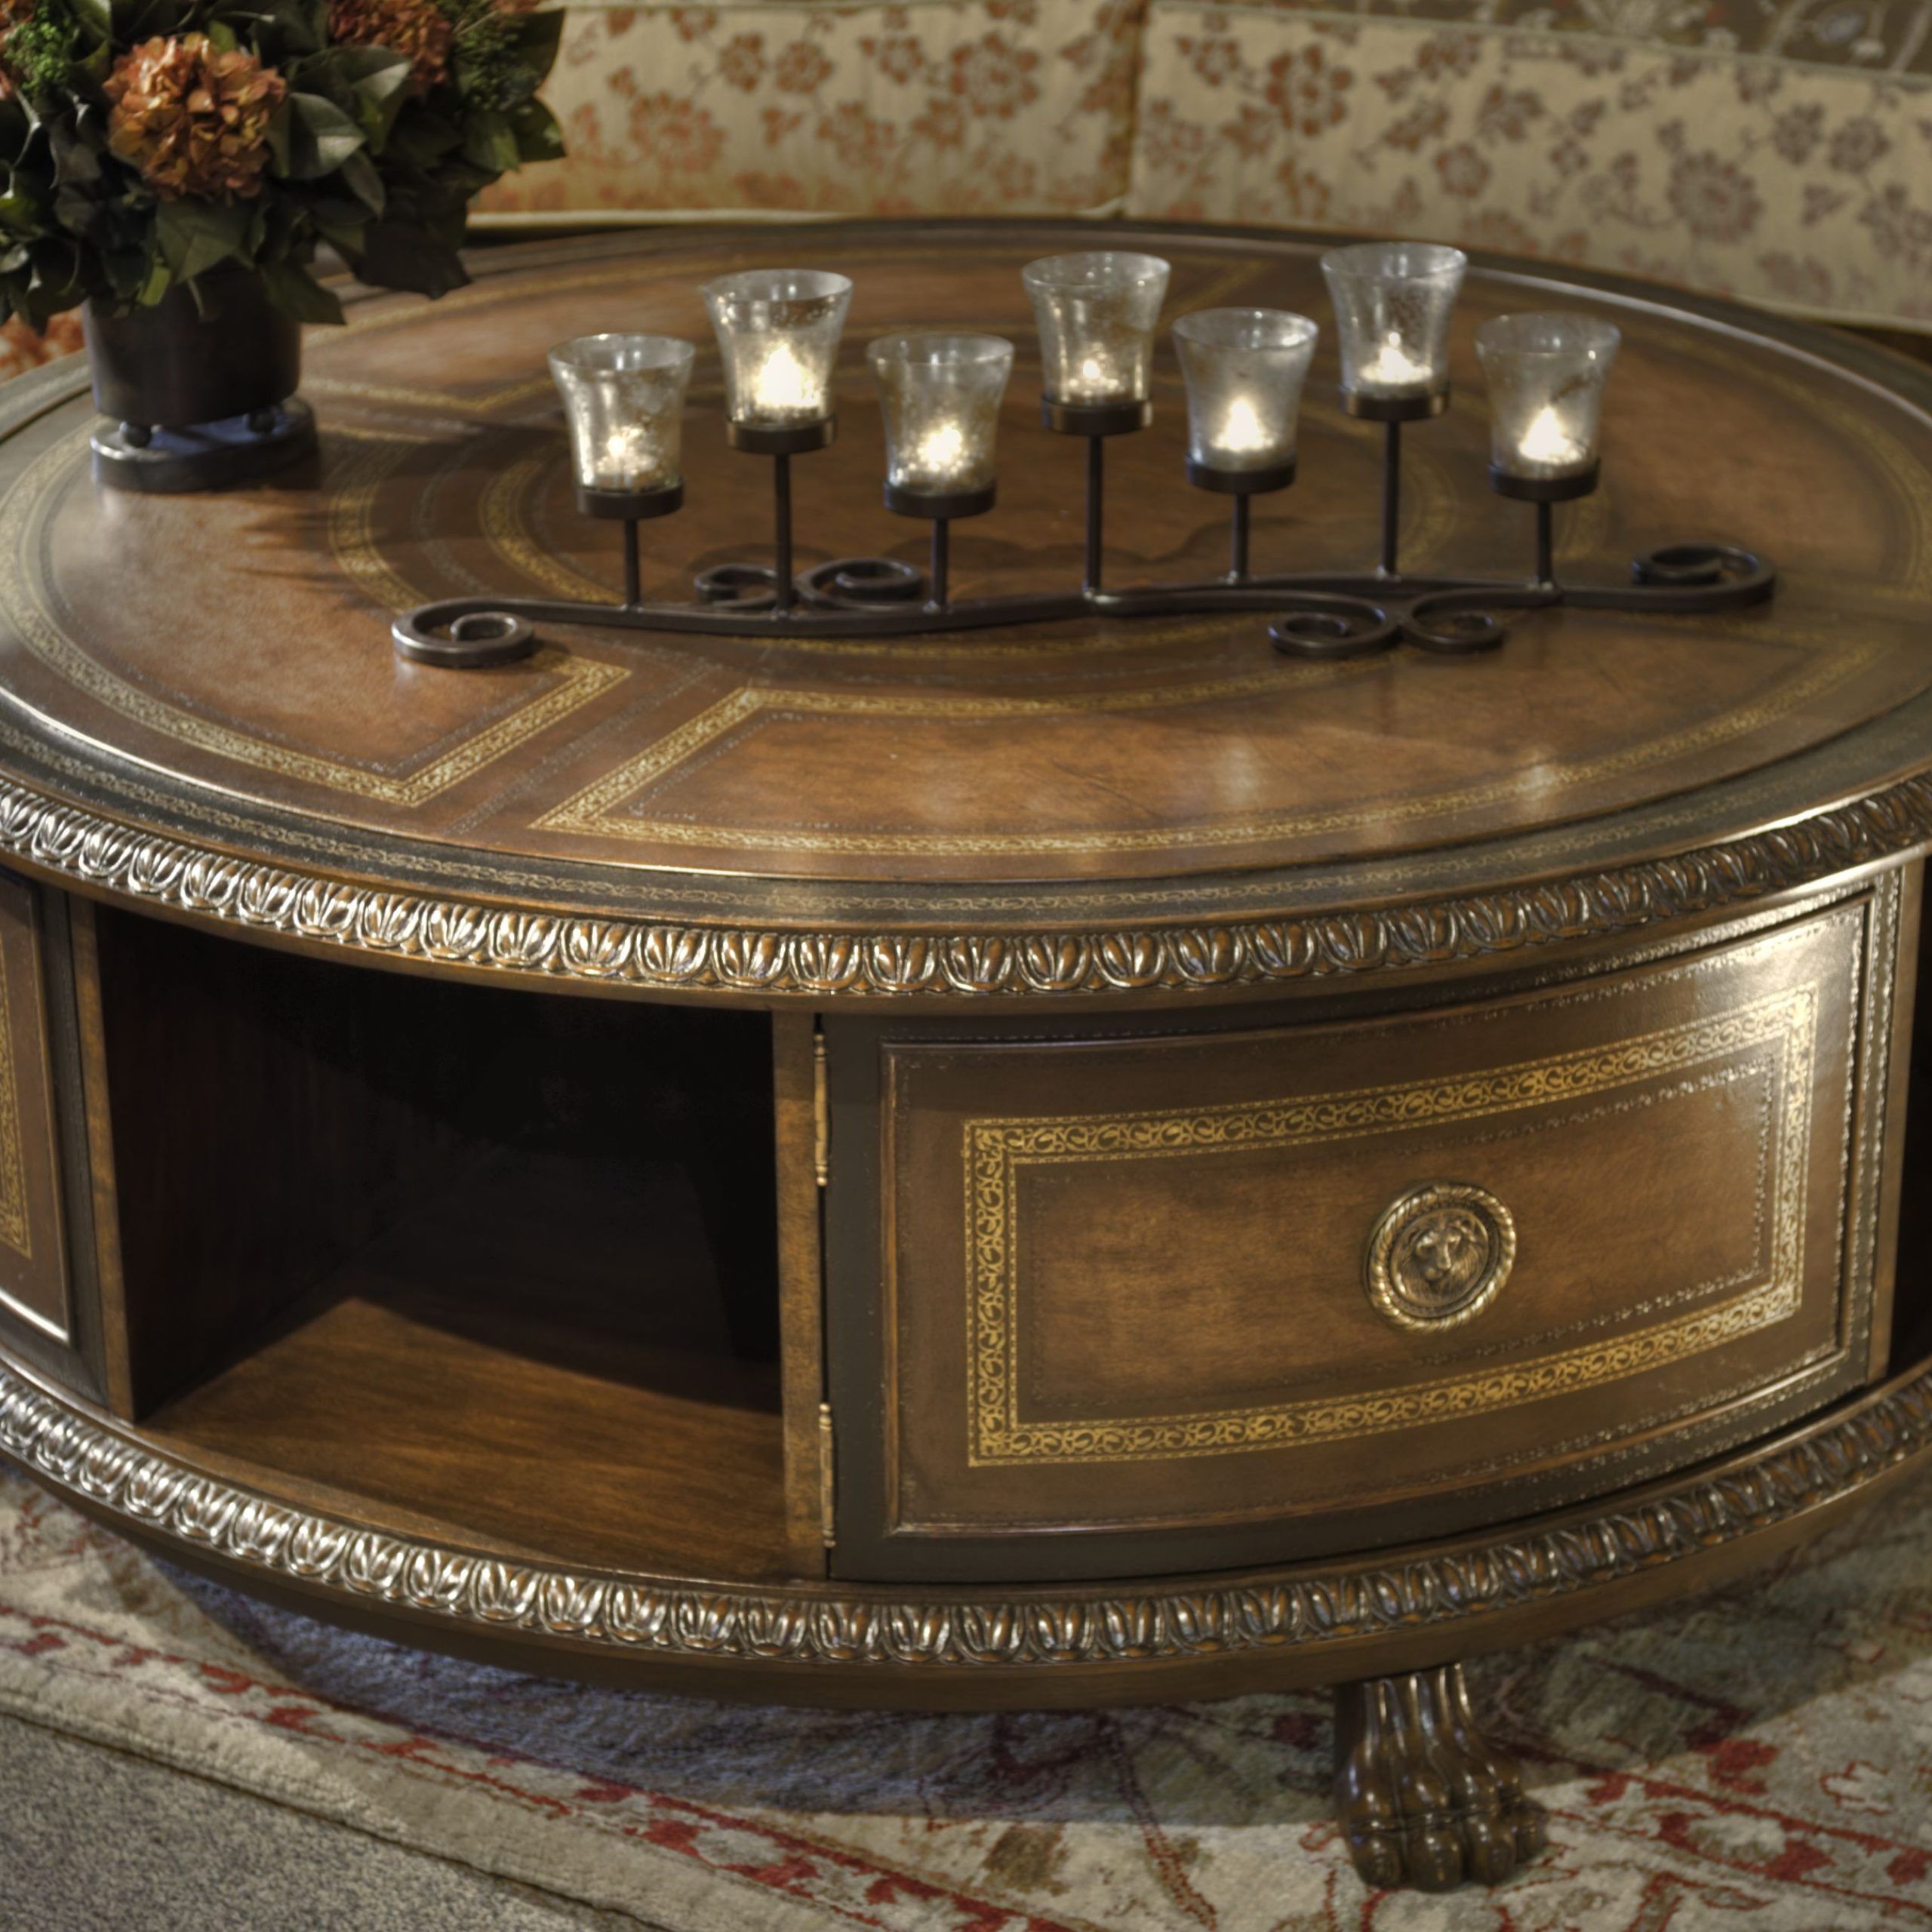 Unique Round Coffee Tables For Every Style And Home – Coffee Table Decor With Monaco Round Coffee Tables (View 20 of 20)